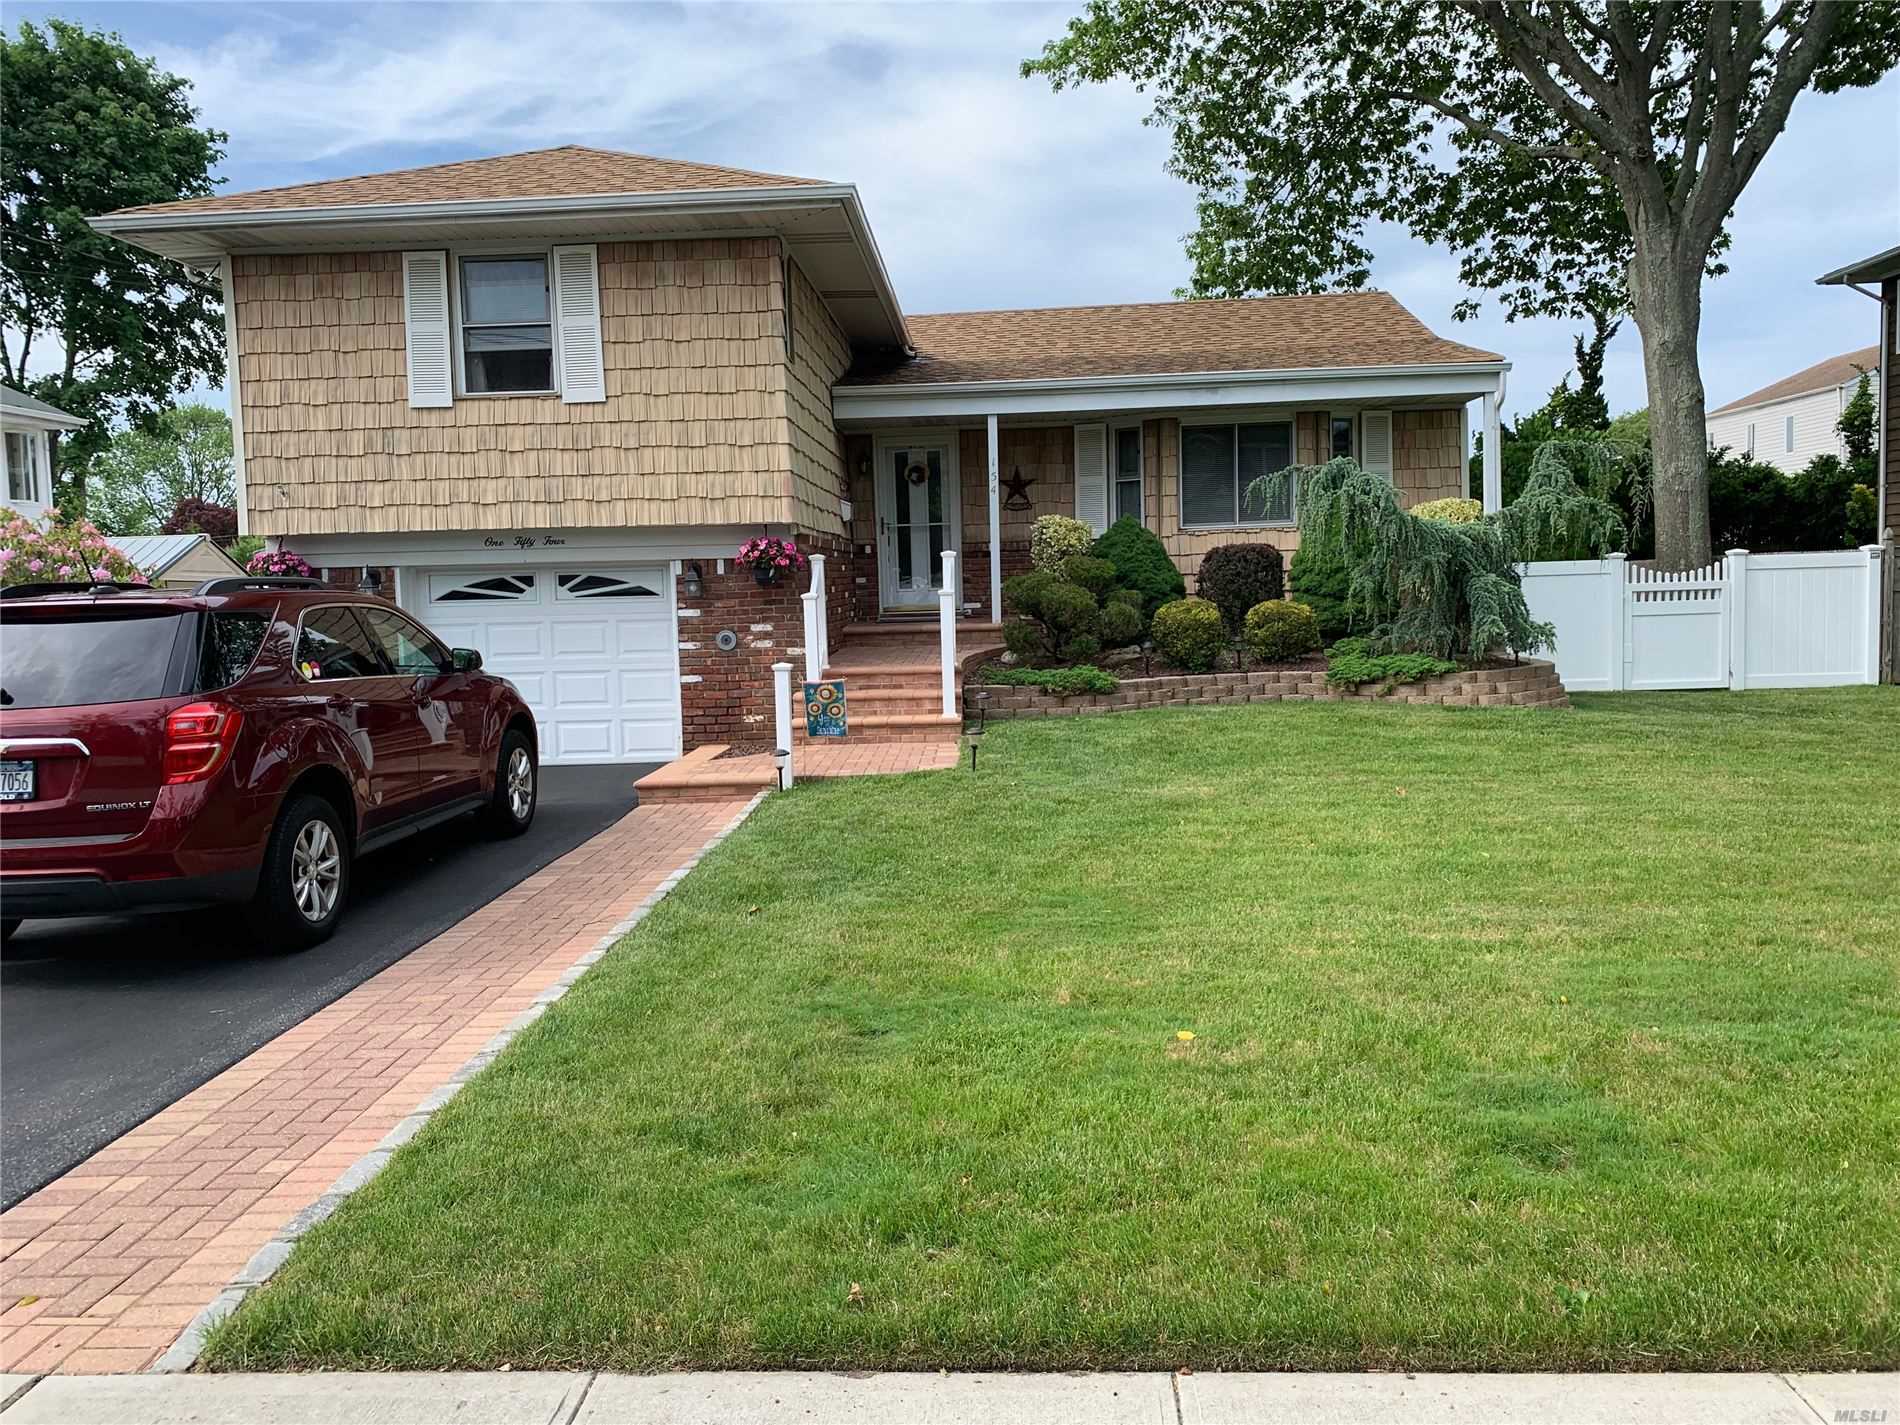 Spacious 3 bedroom Split mid block. 3 bedrooms 1.5 bathrooms large backyard. All new stainless steel appliances washer /dryer and boiler. New to market